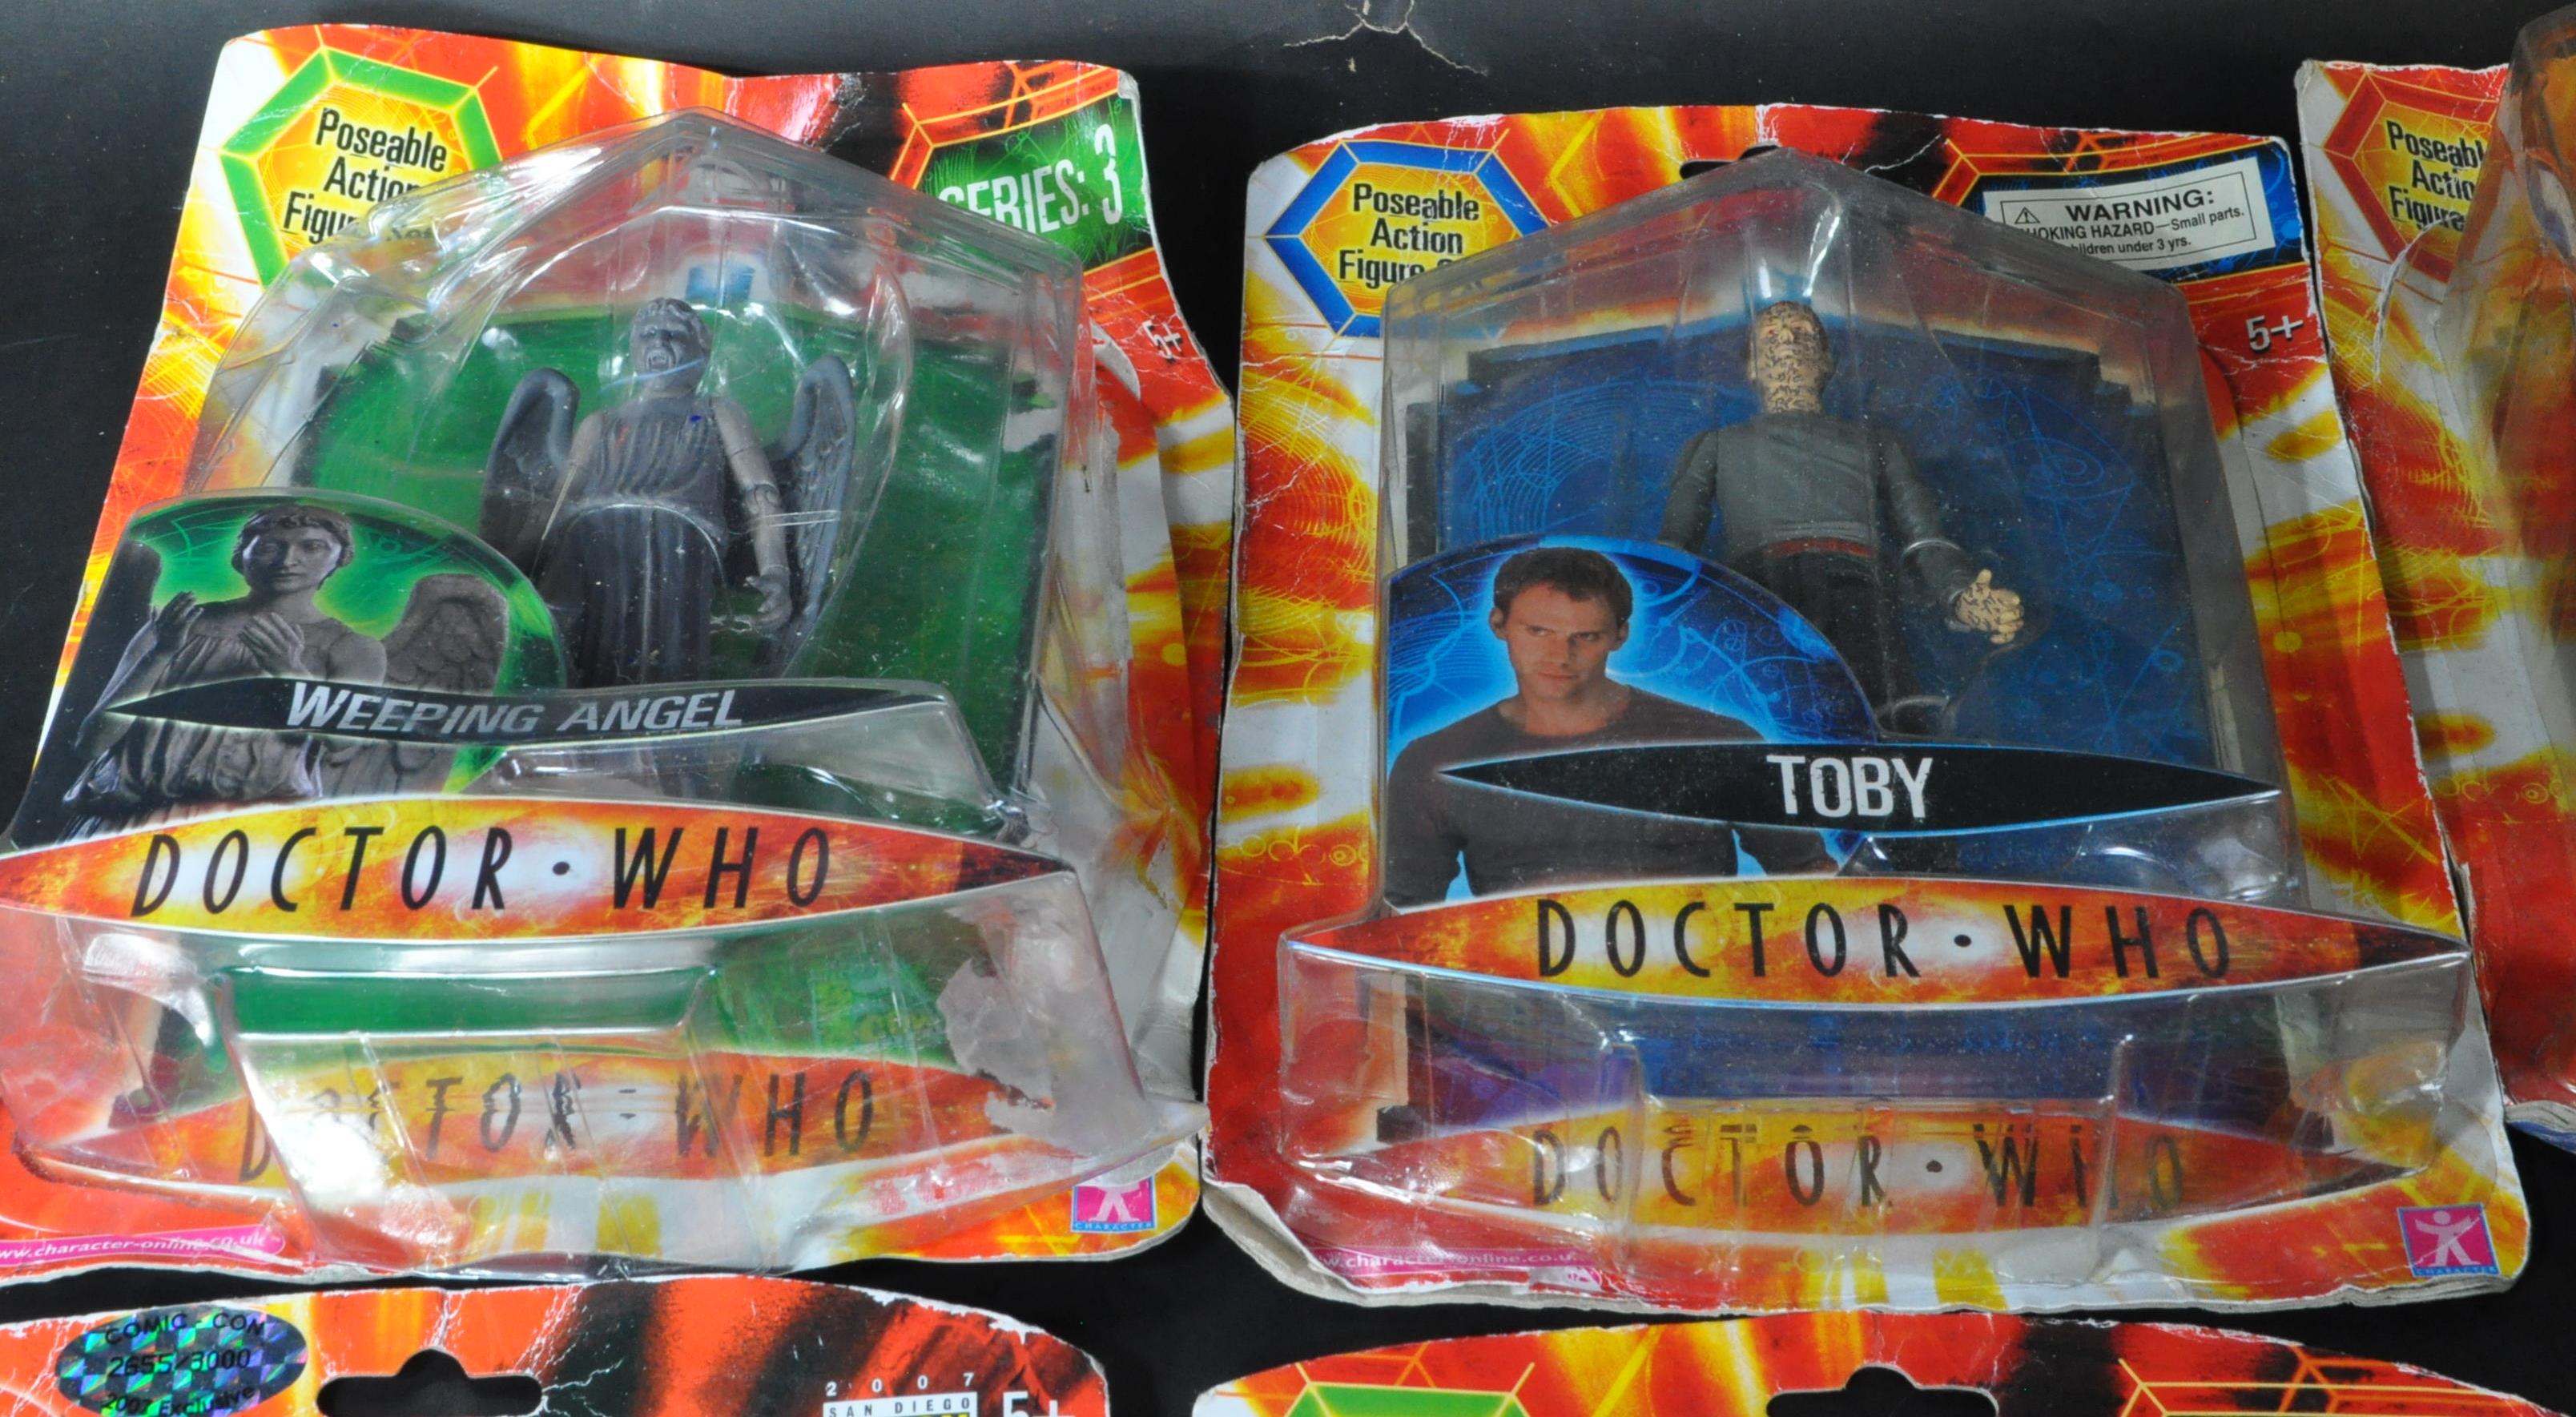 DOCTOR WHO - CHARACTER OPTIONS - COLLECTION OF ACTION FIGURES - Image 5 of 5